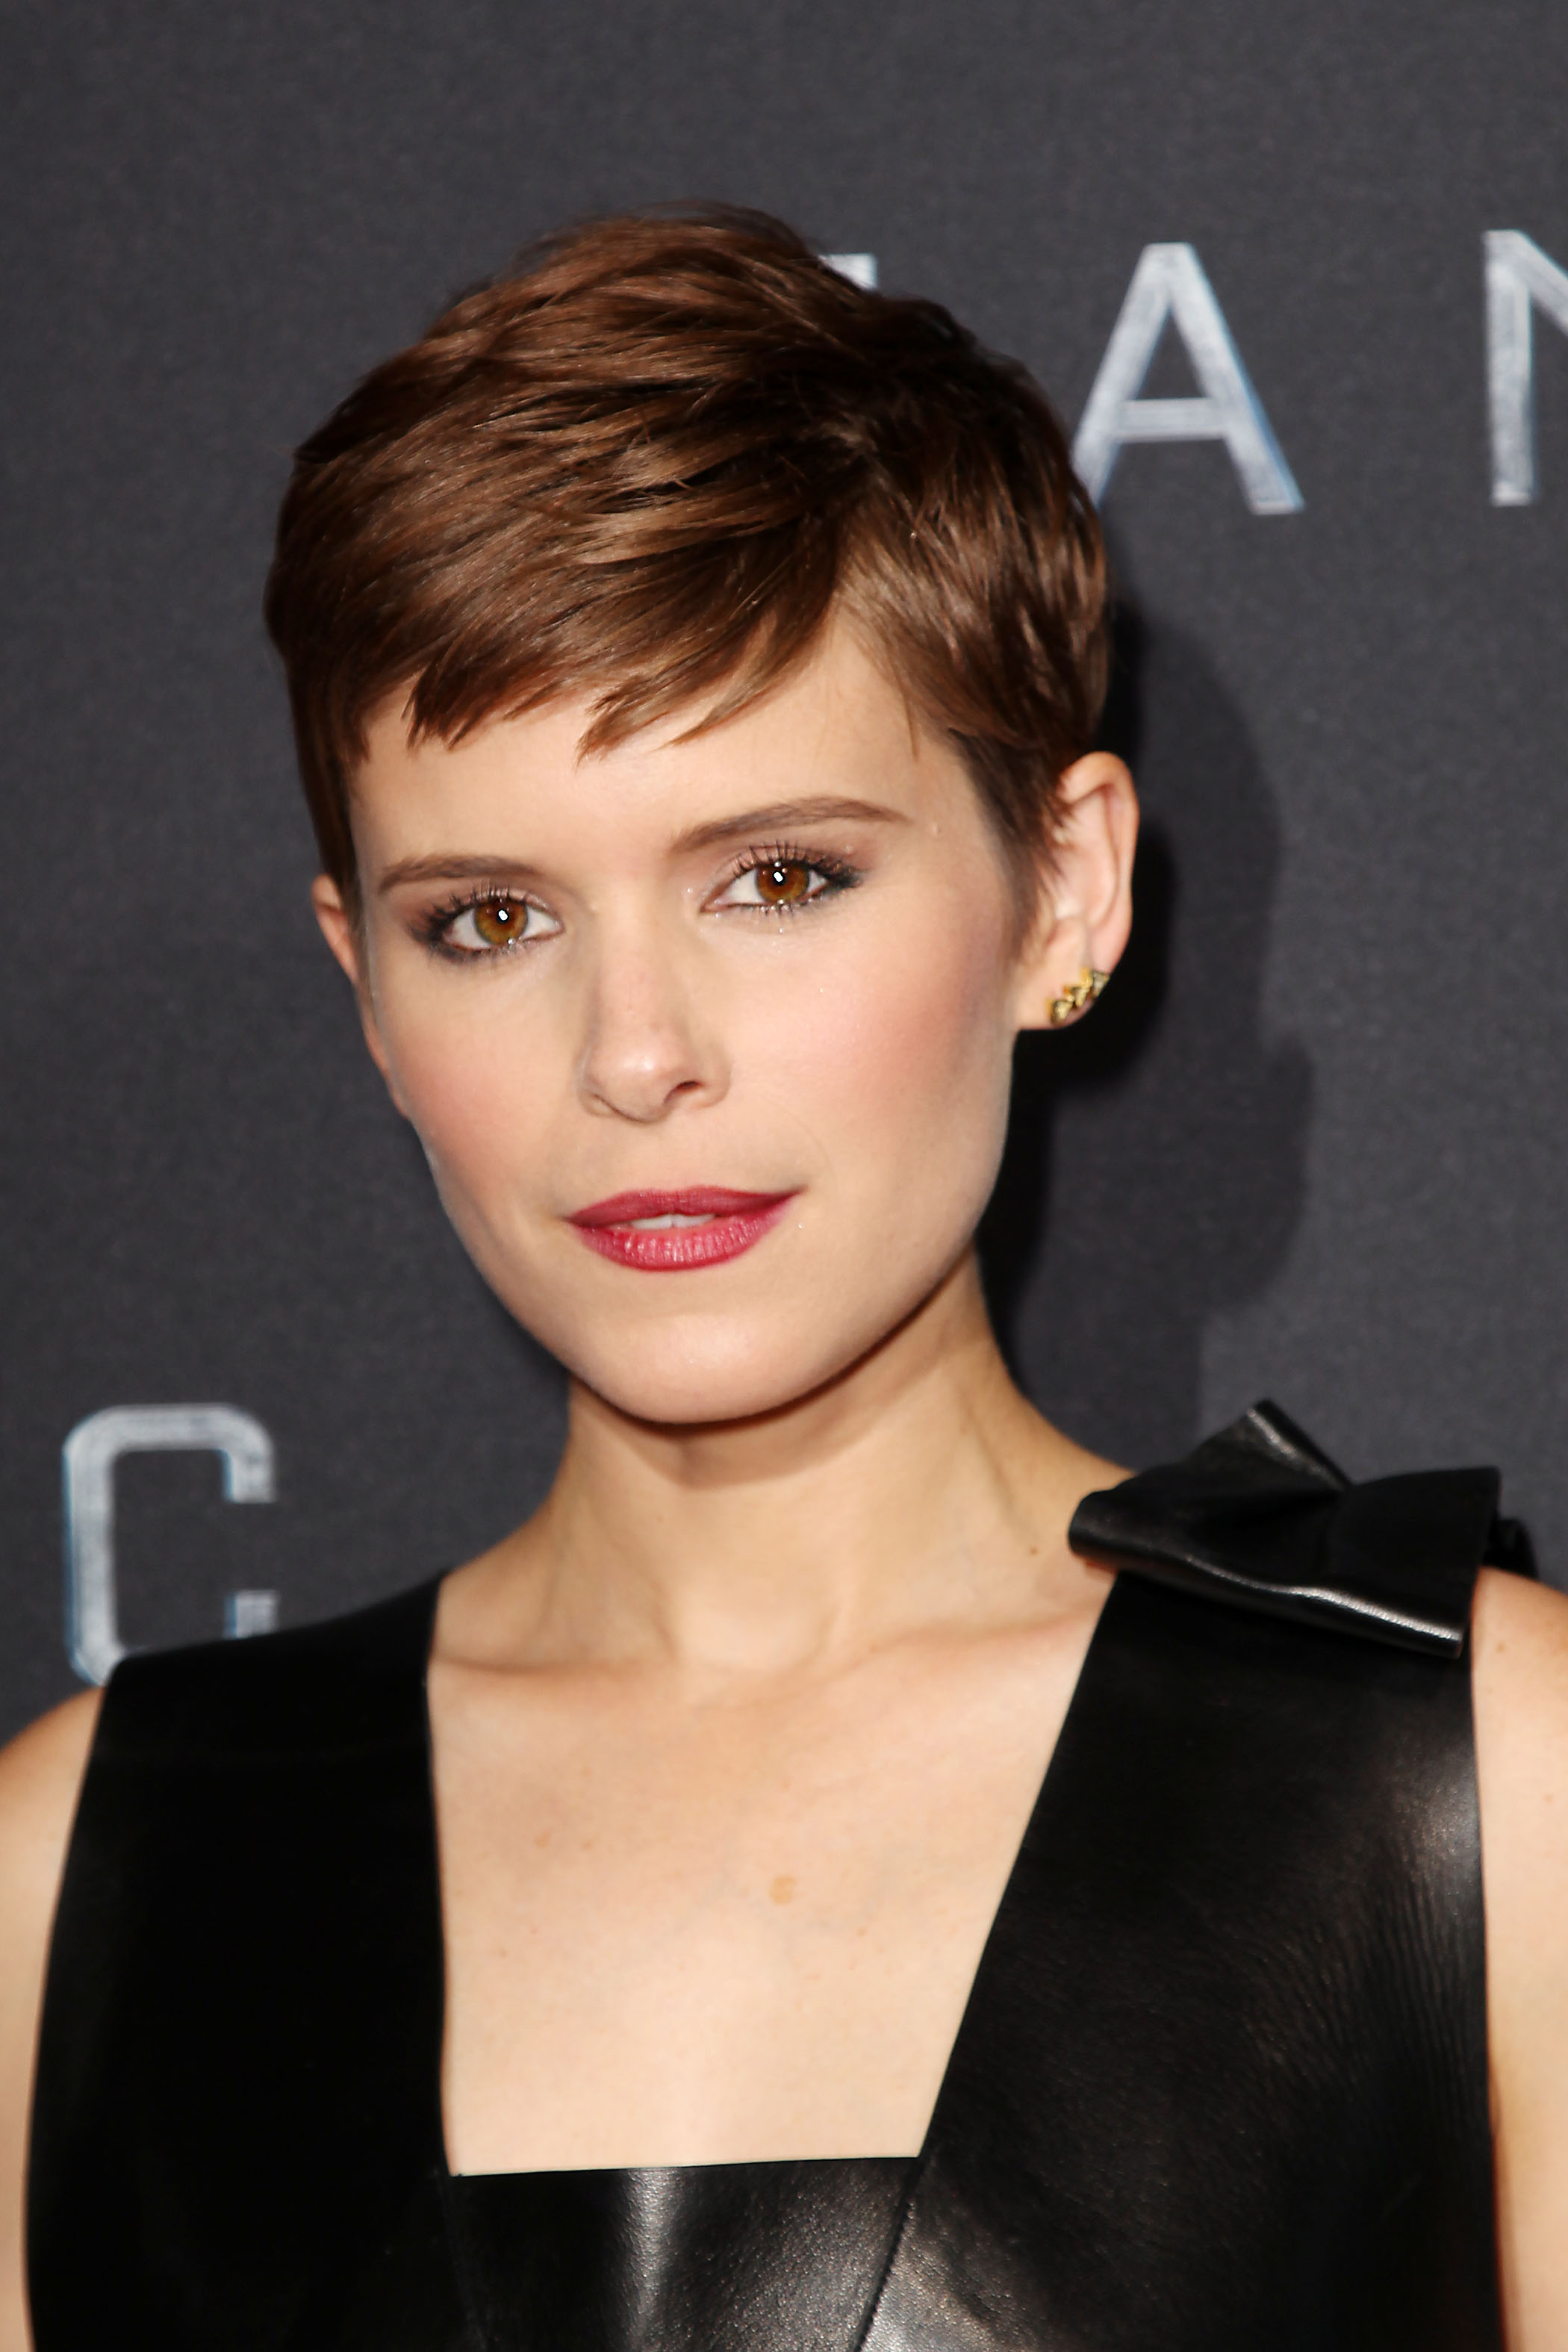 Kate Mara attends Fantastic Four premiere in NYC